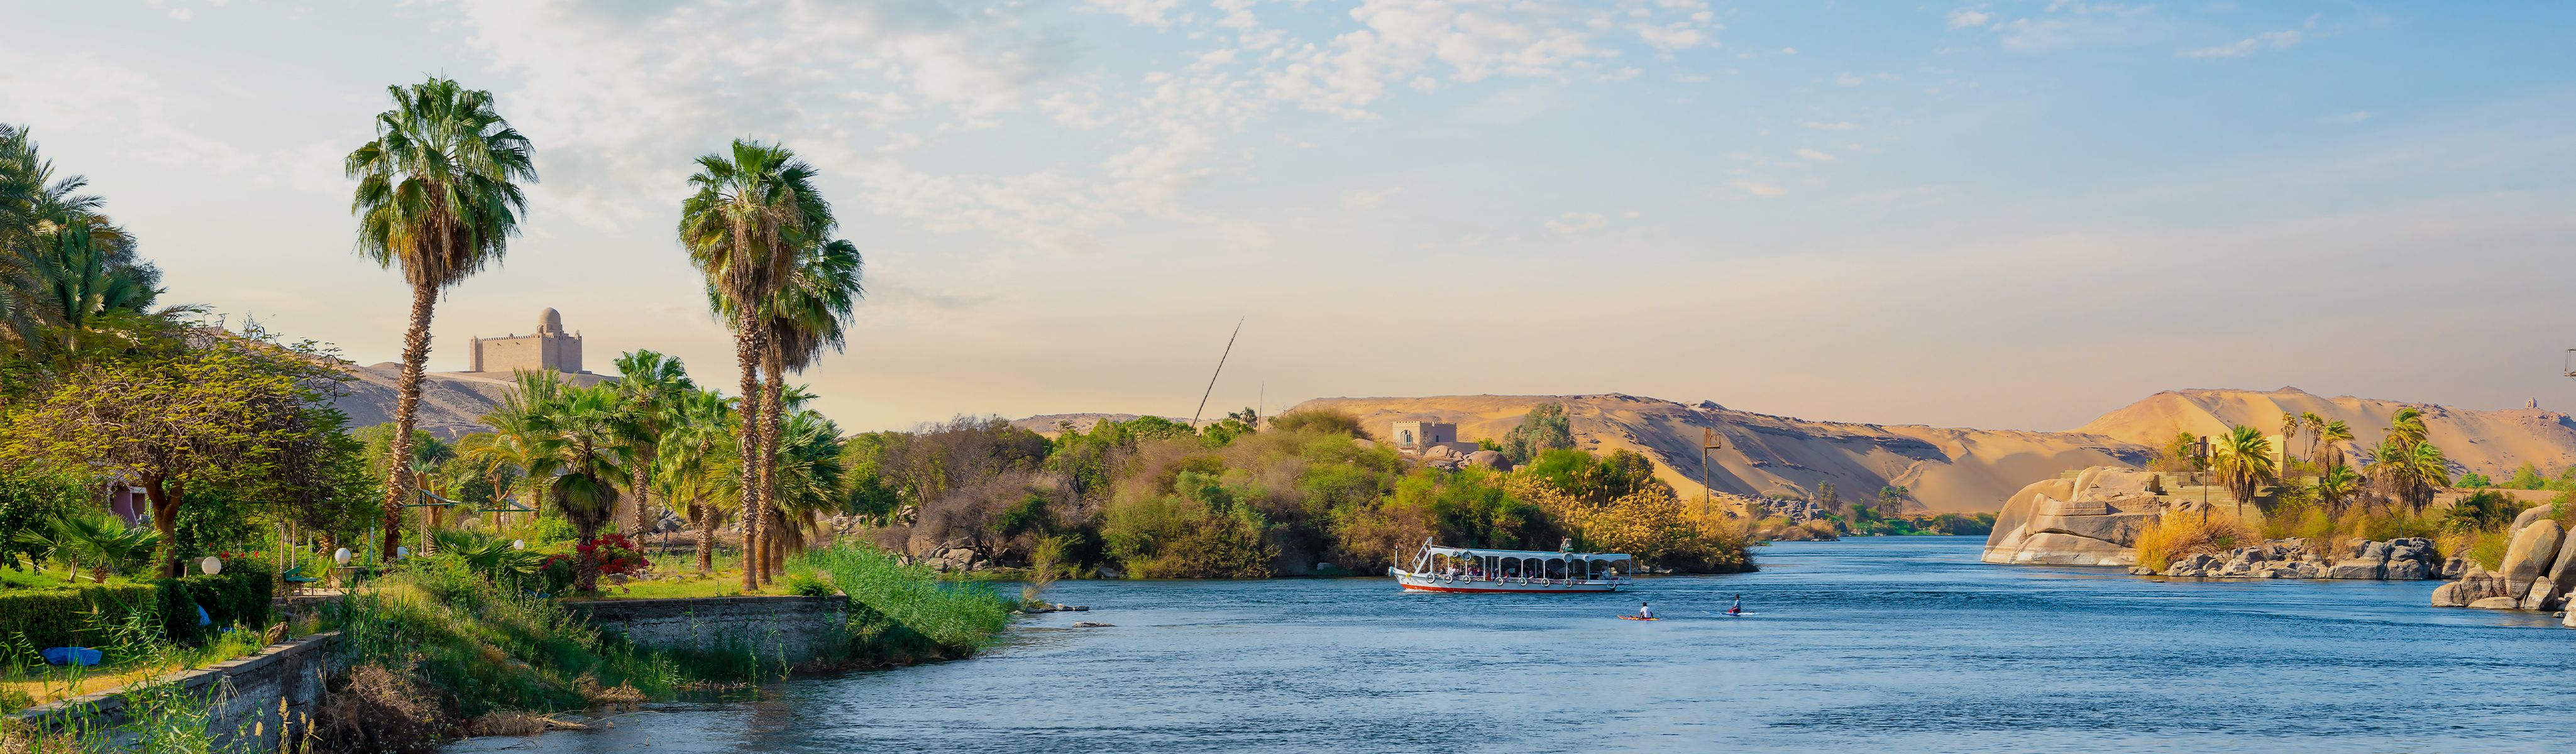 tour of the nile river